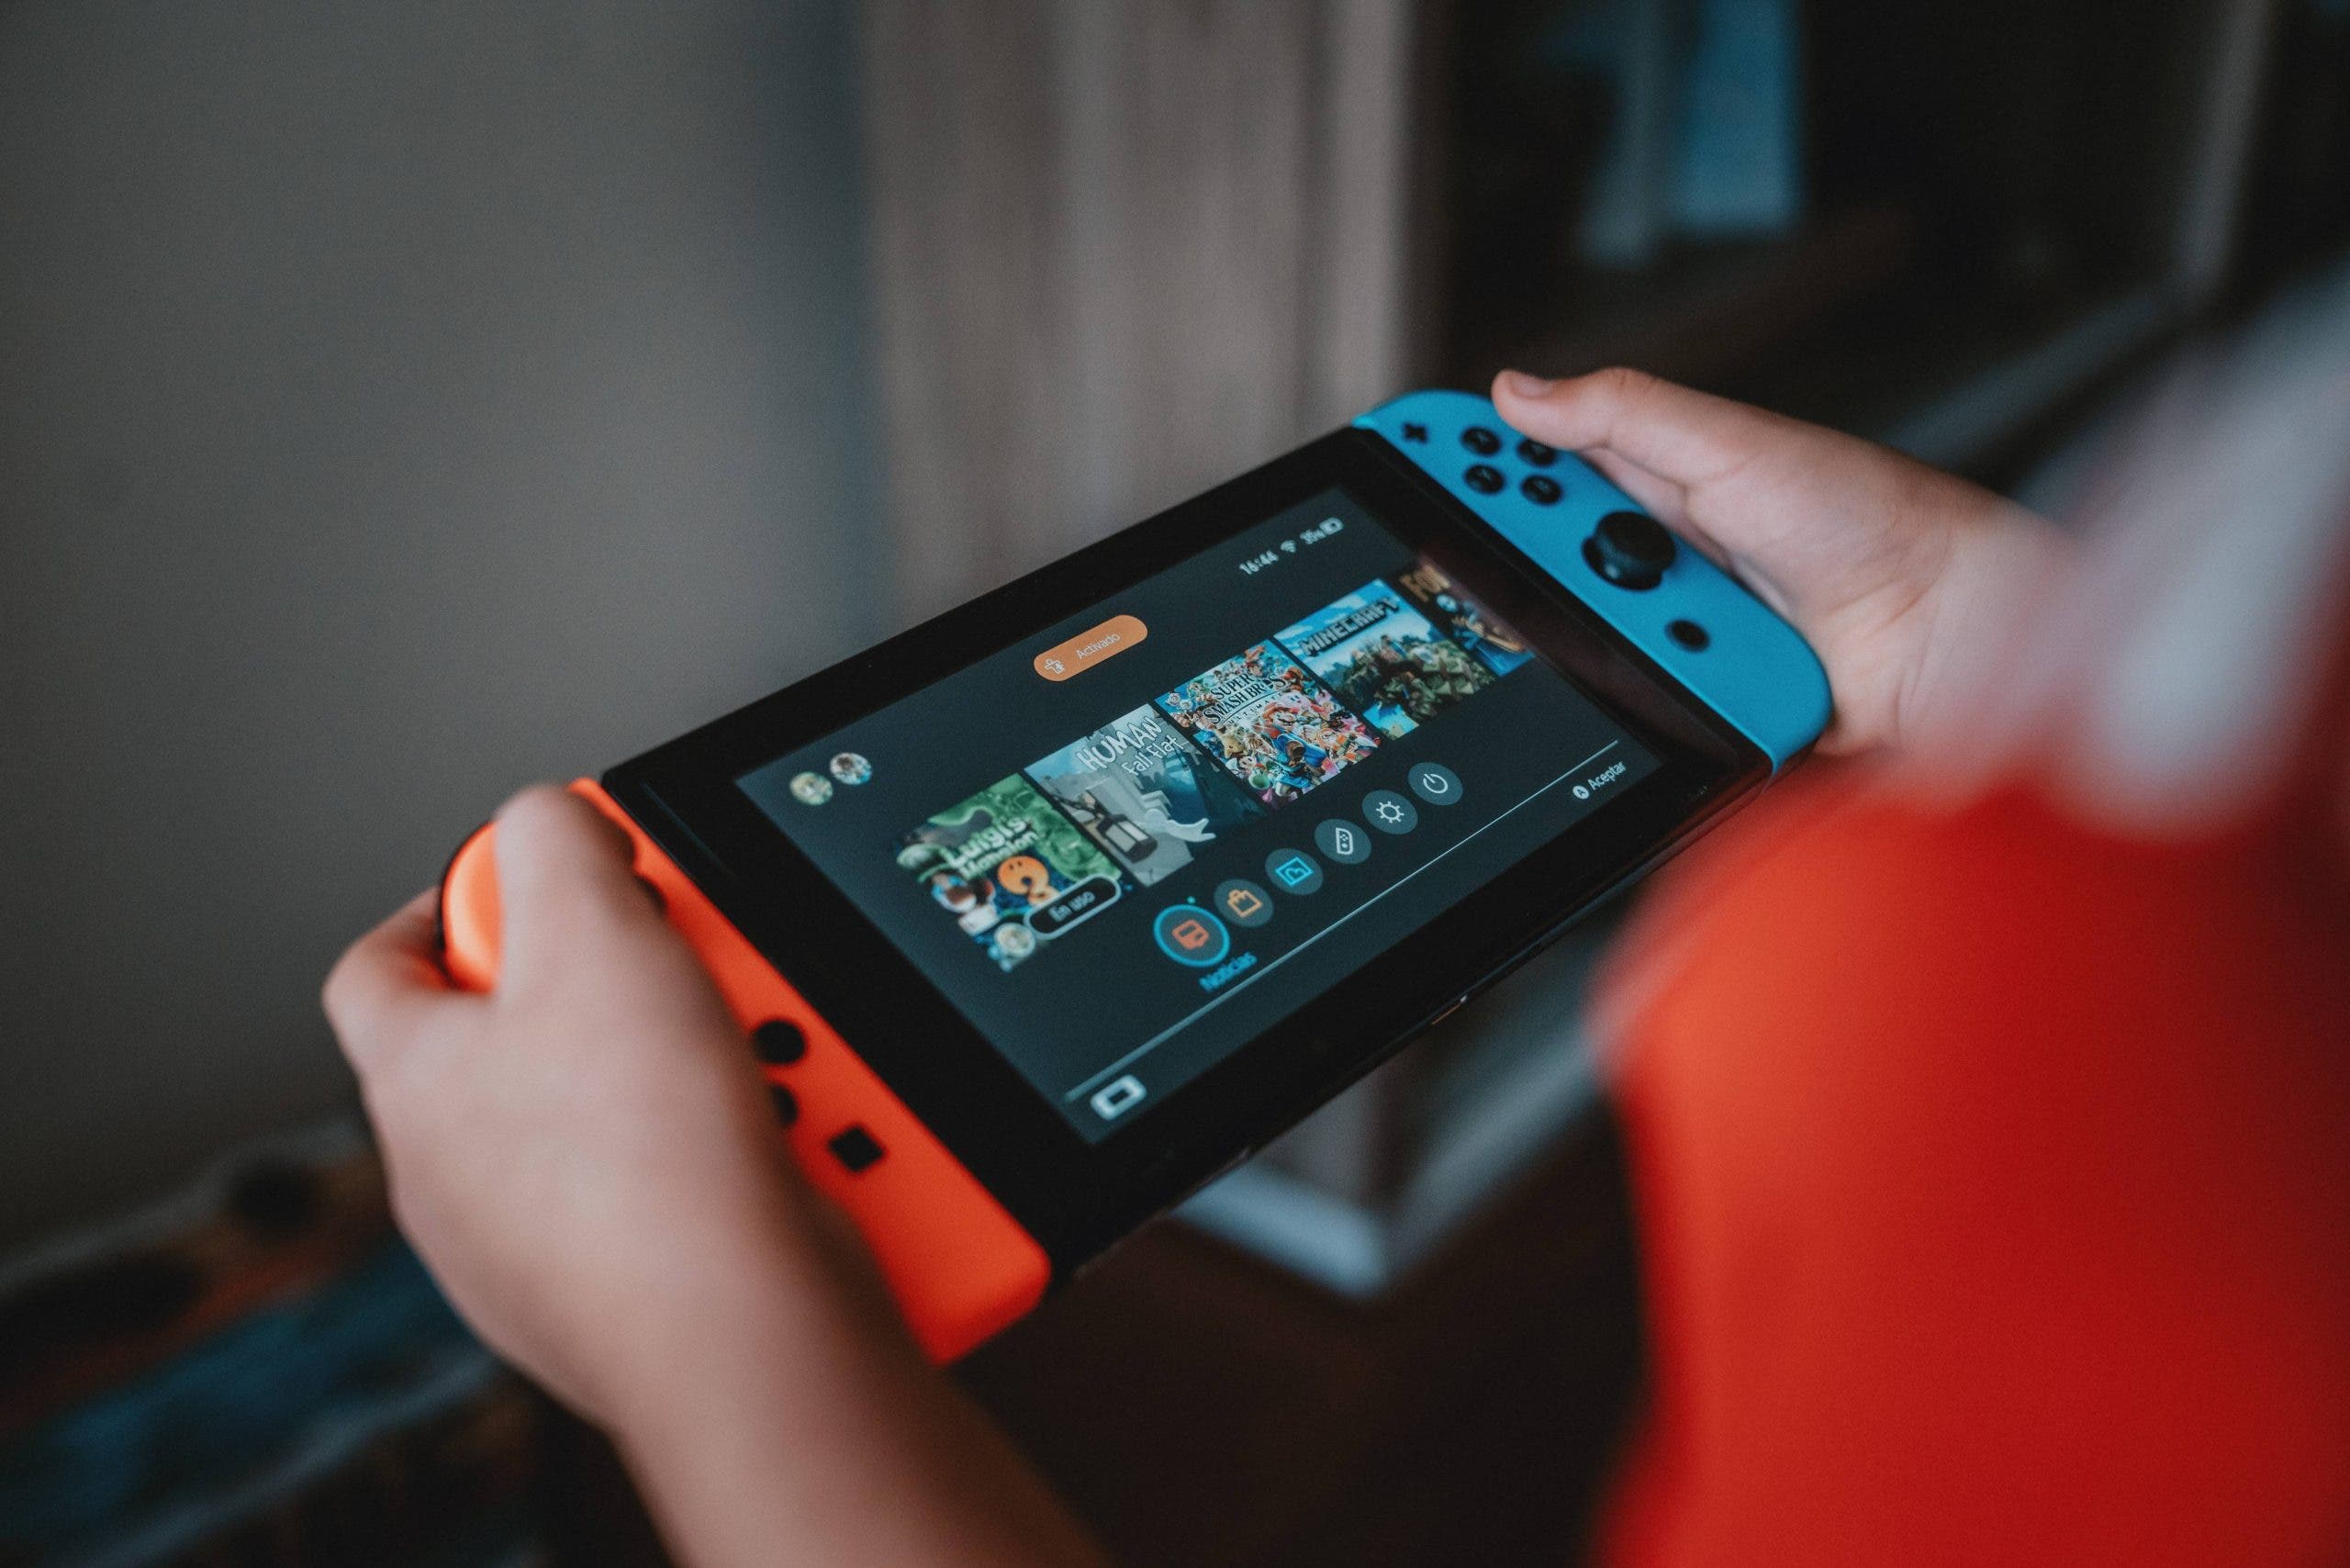 The video game industry giant has benefited from the sale of the Nintendo Switch video console